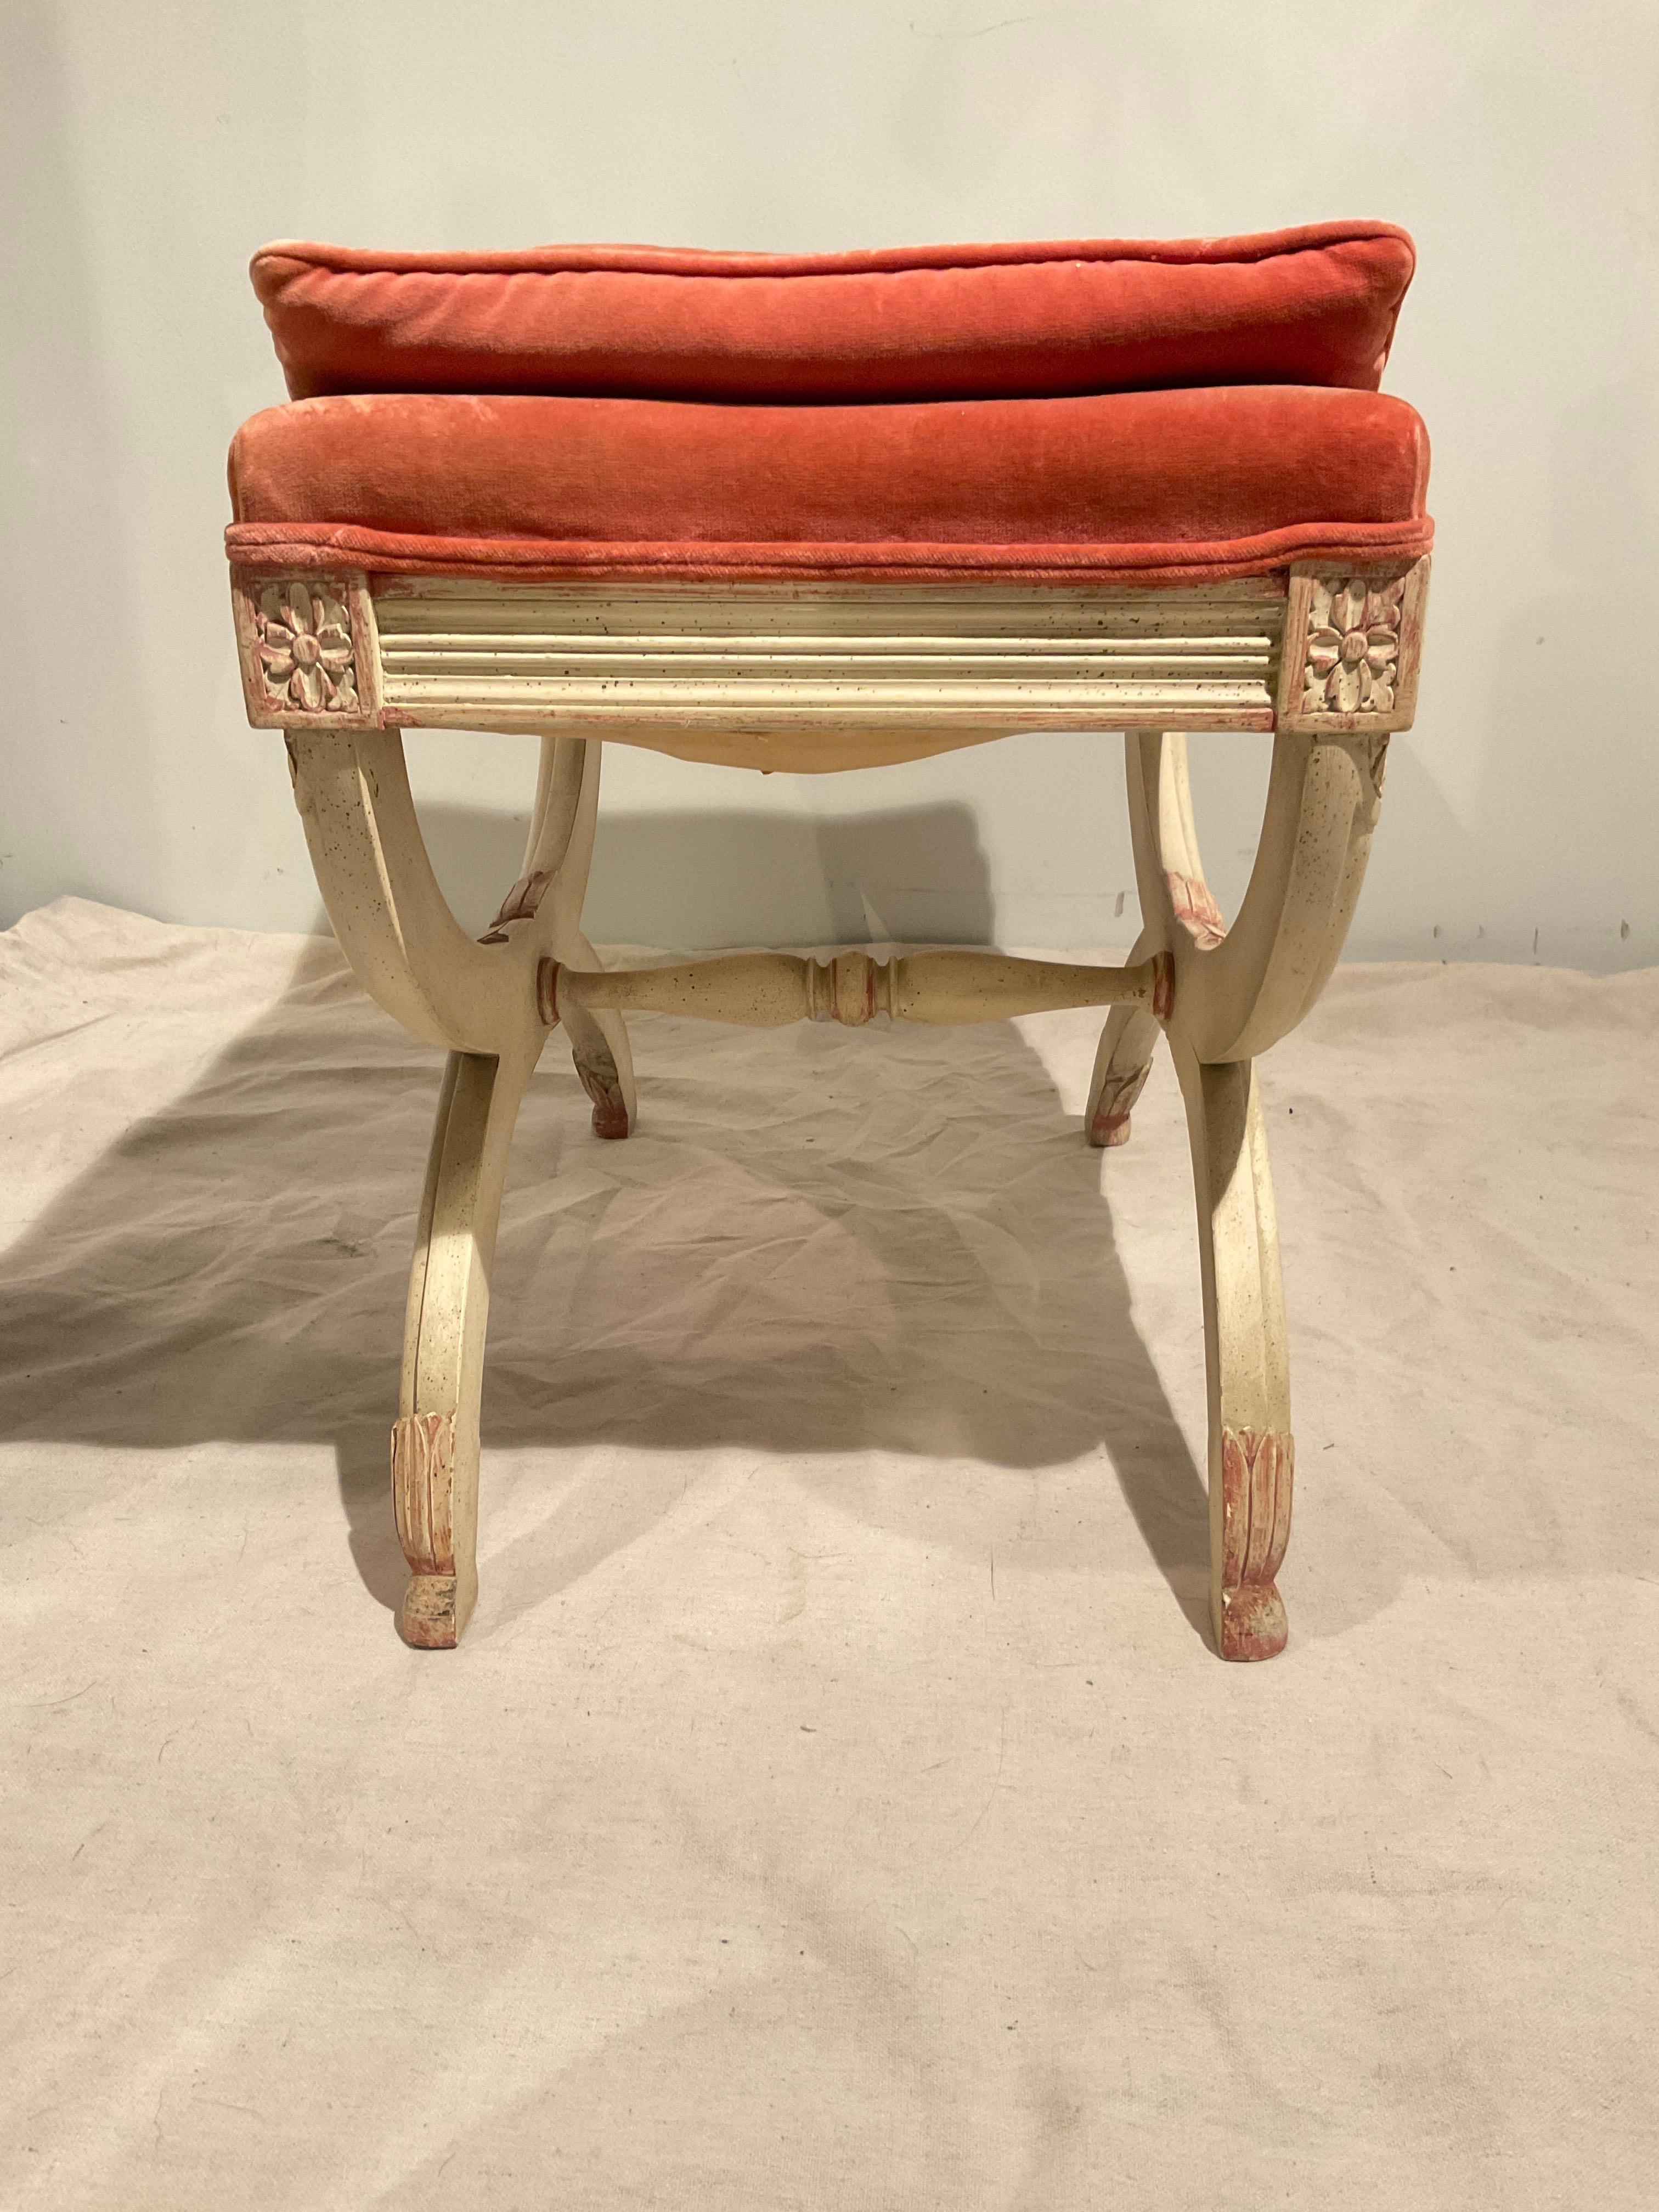 1950s Regency Style Painted Wood Bench In Good Condition For Sale In Tarrytown, NY